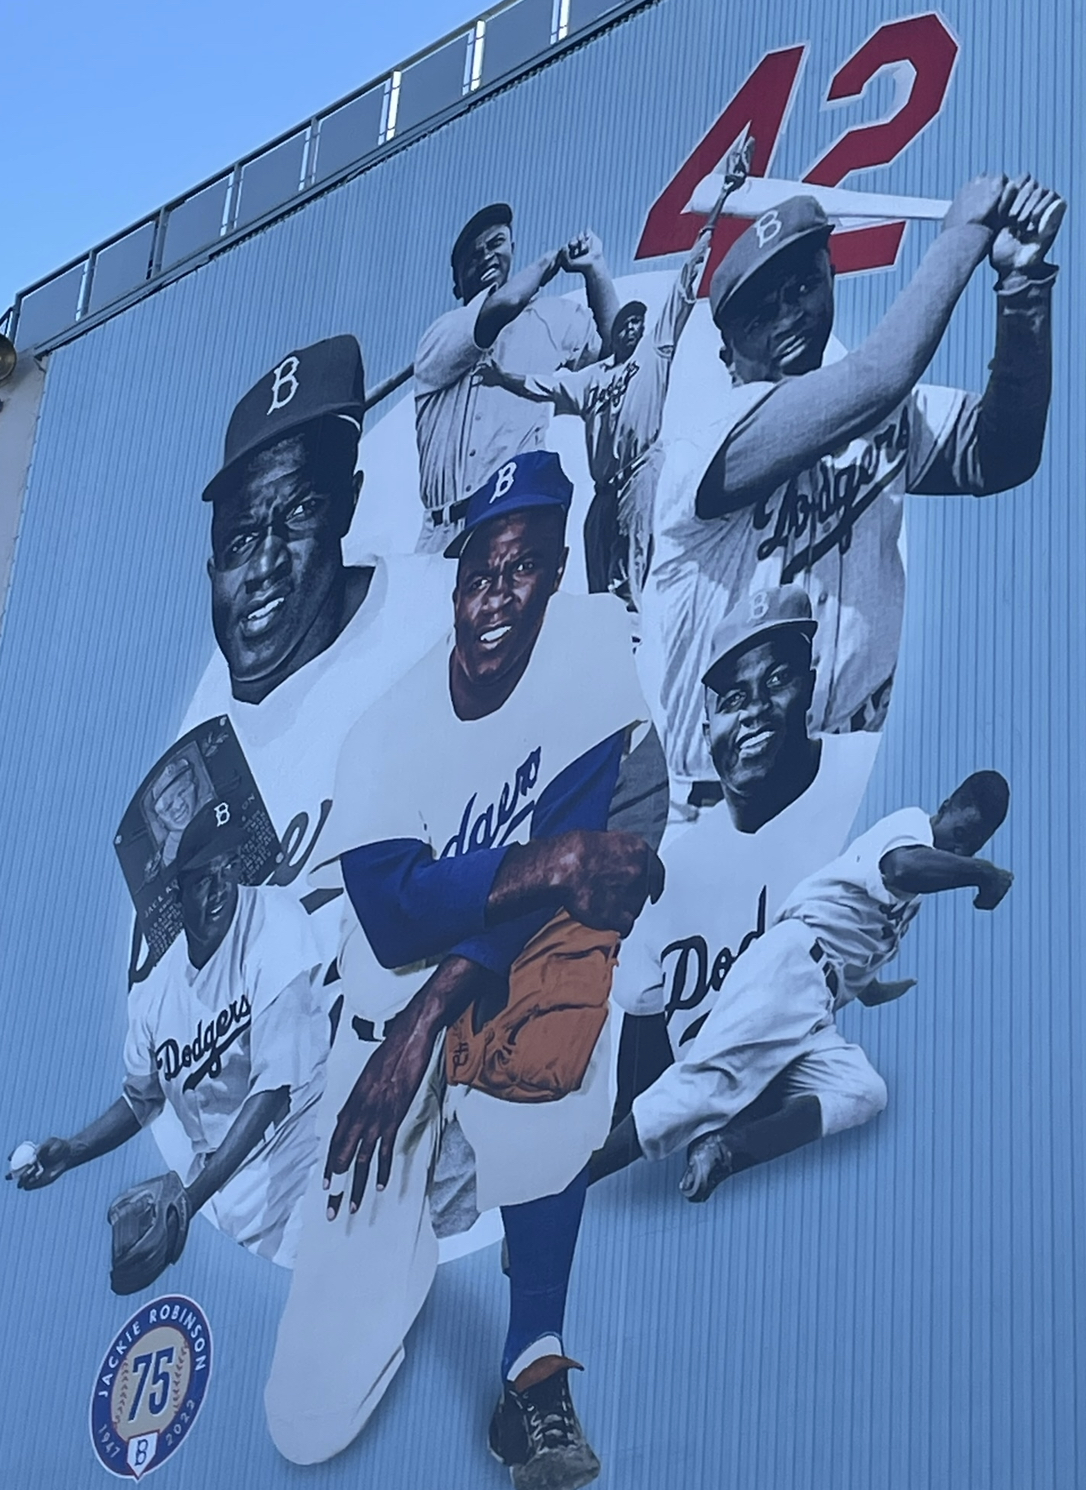 A look back at Jackie Robinson on the 75th anniversary of breaking